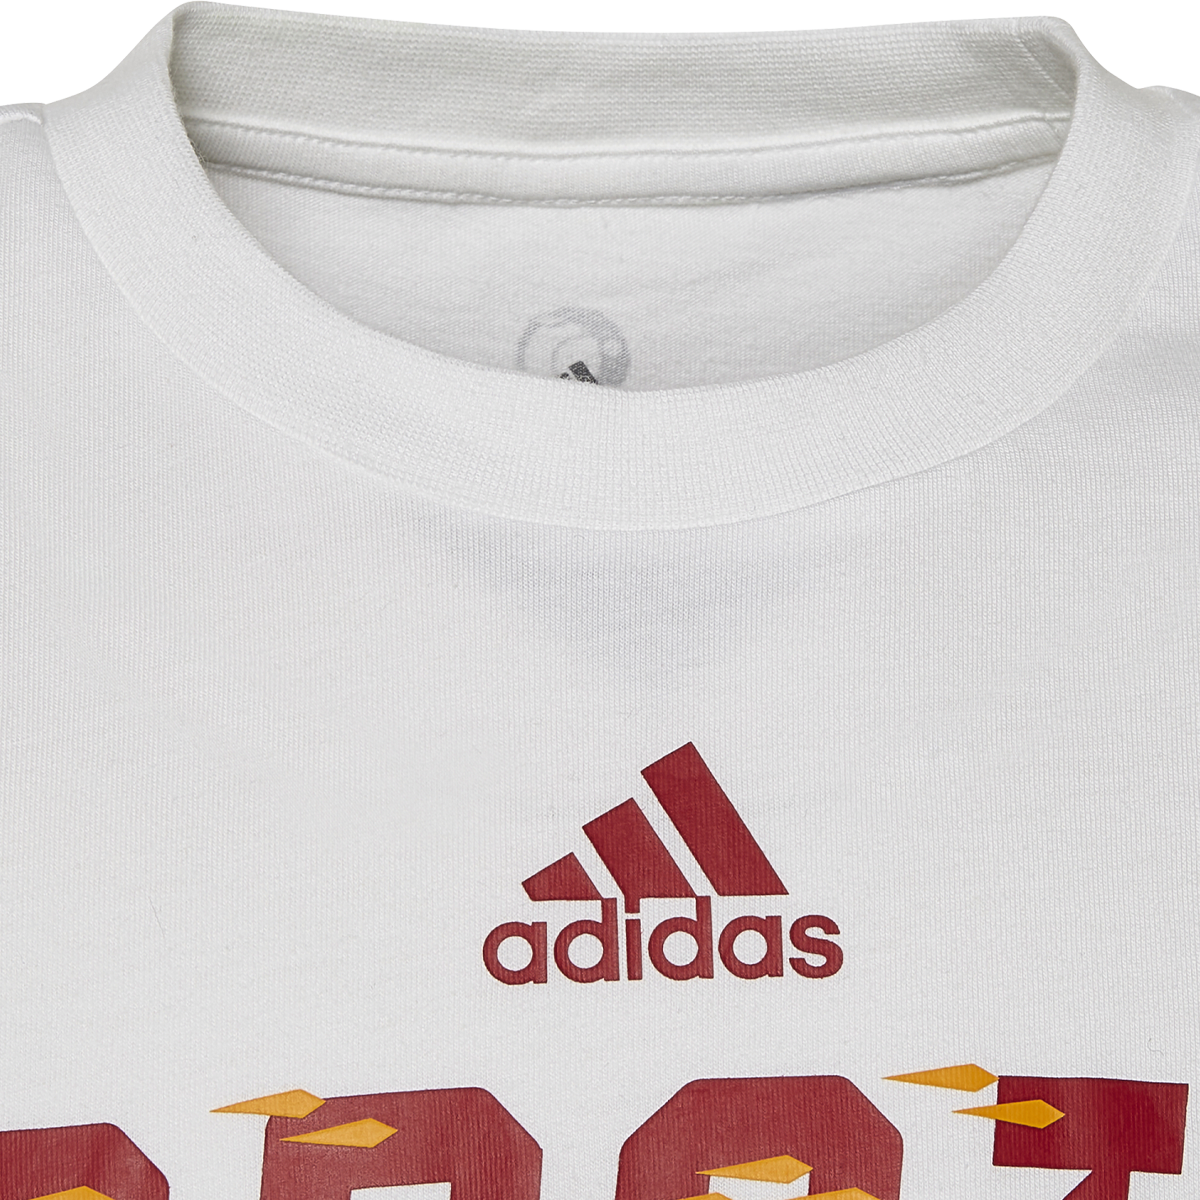 Youth FIFA World Cup 2022 Spain Tee alternate view